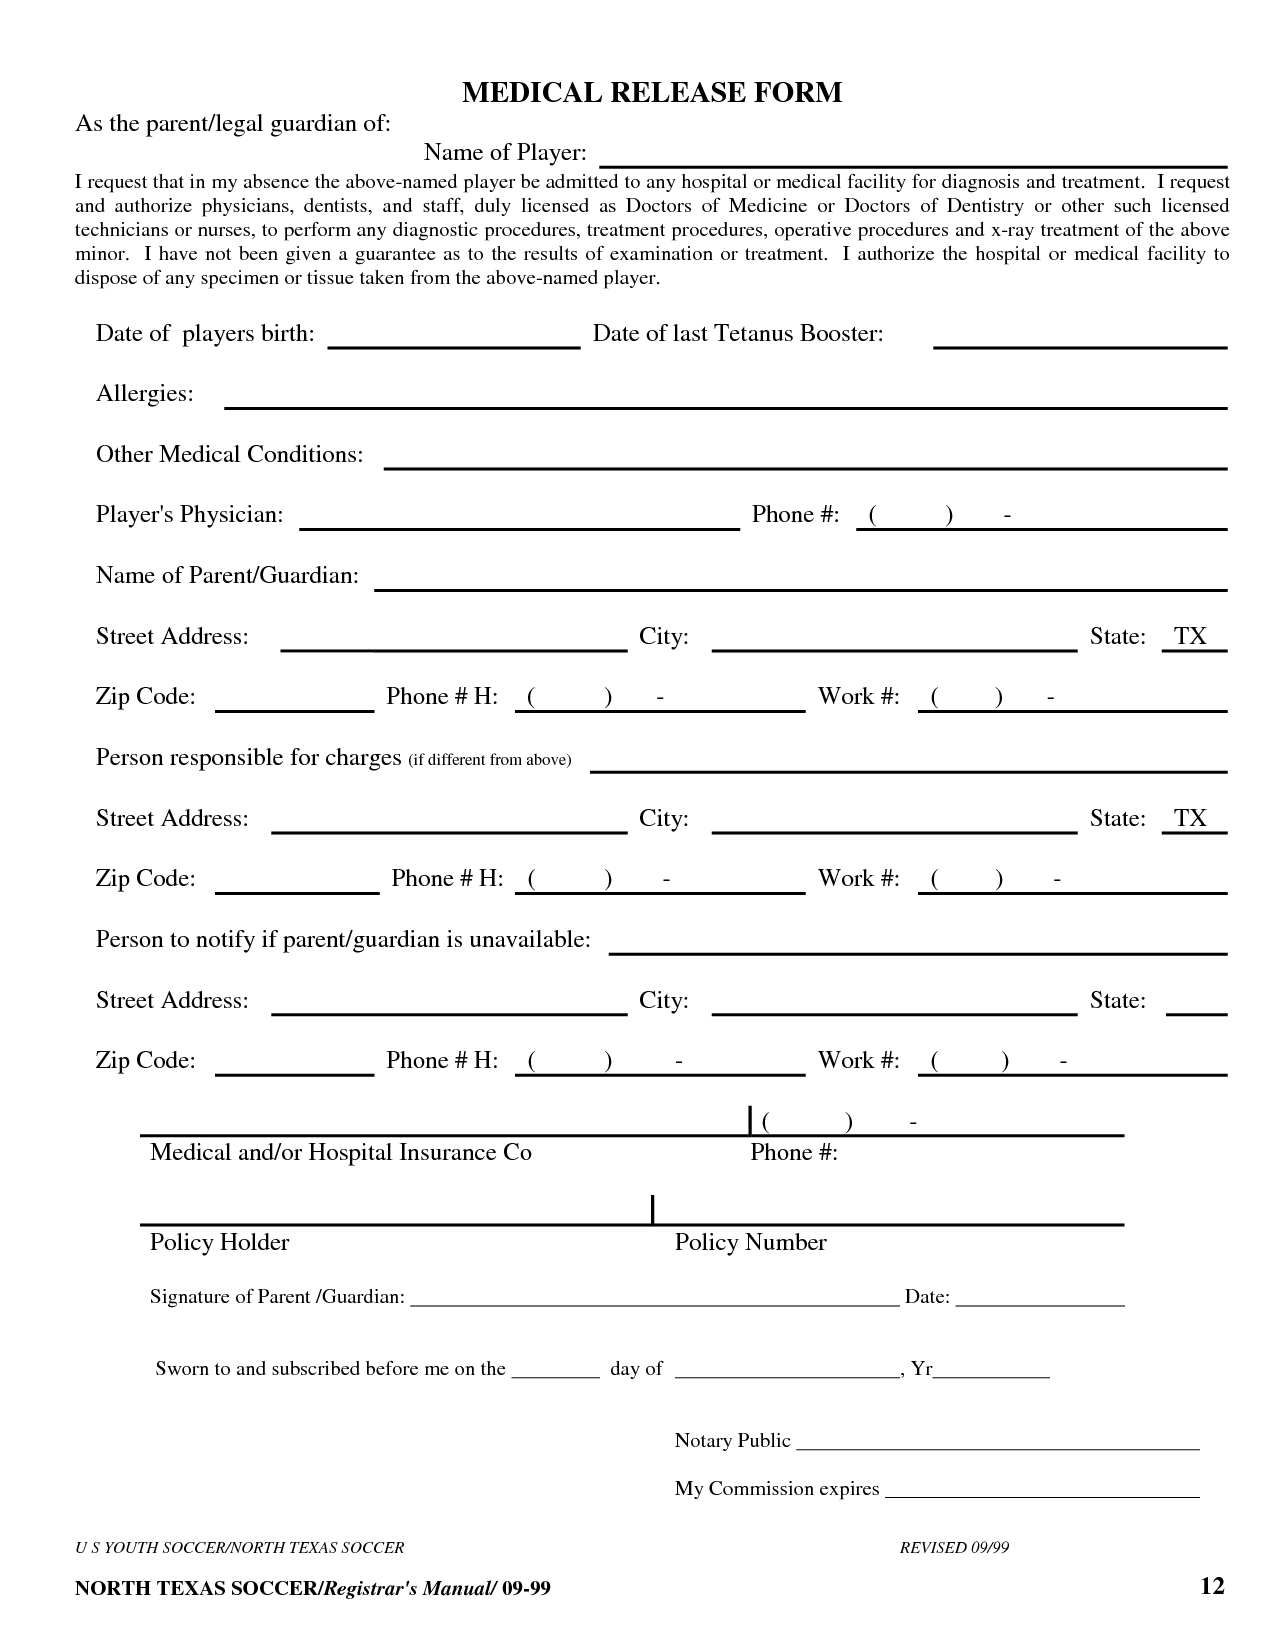 Free Printable Medical Release Form Template | Medical Release Form - Free Printable Medical Forms Kit